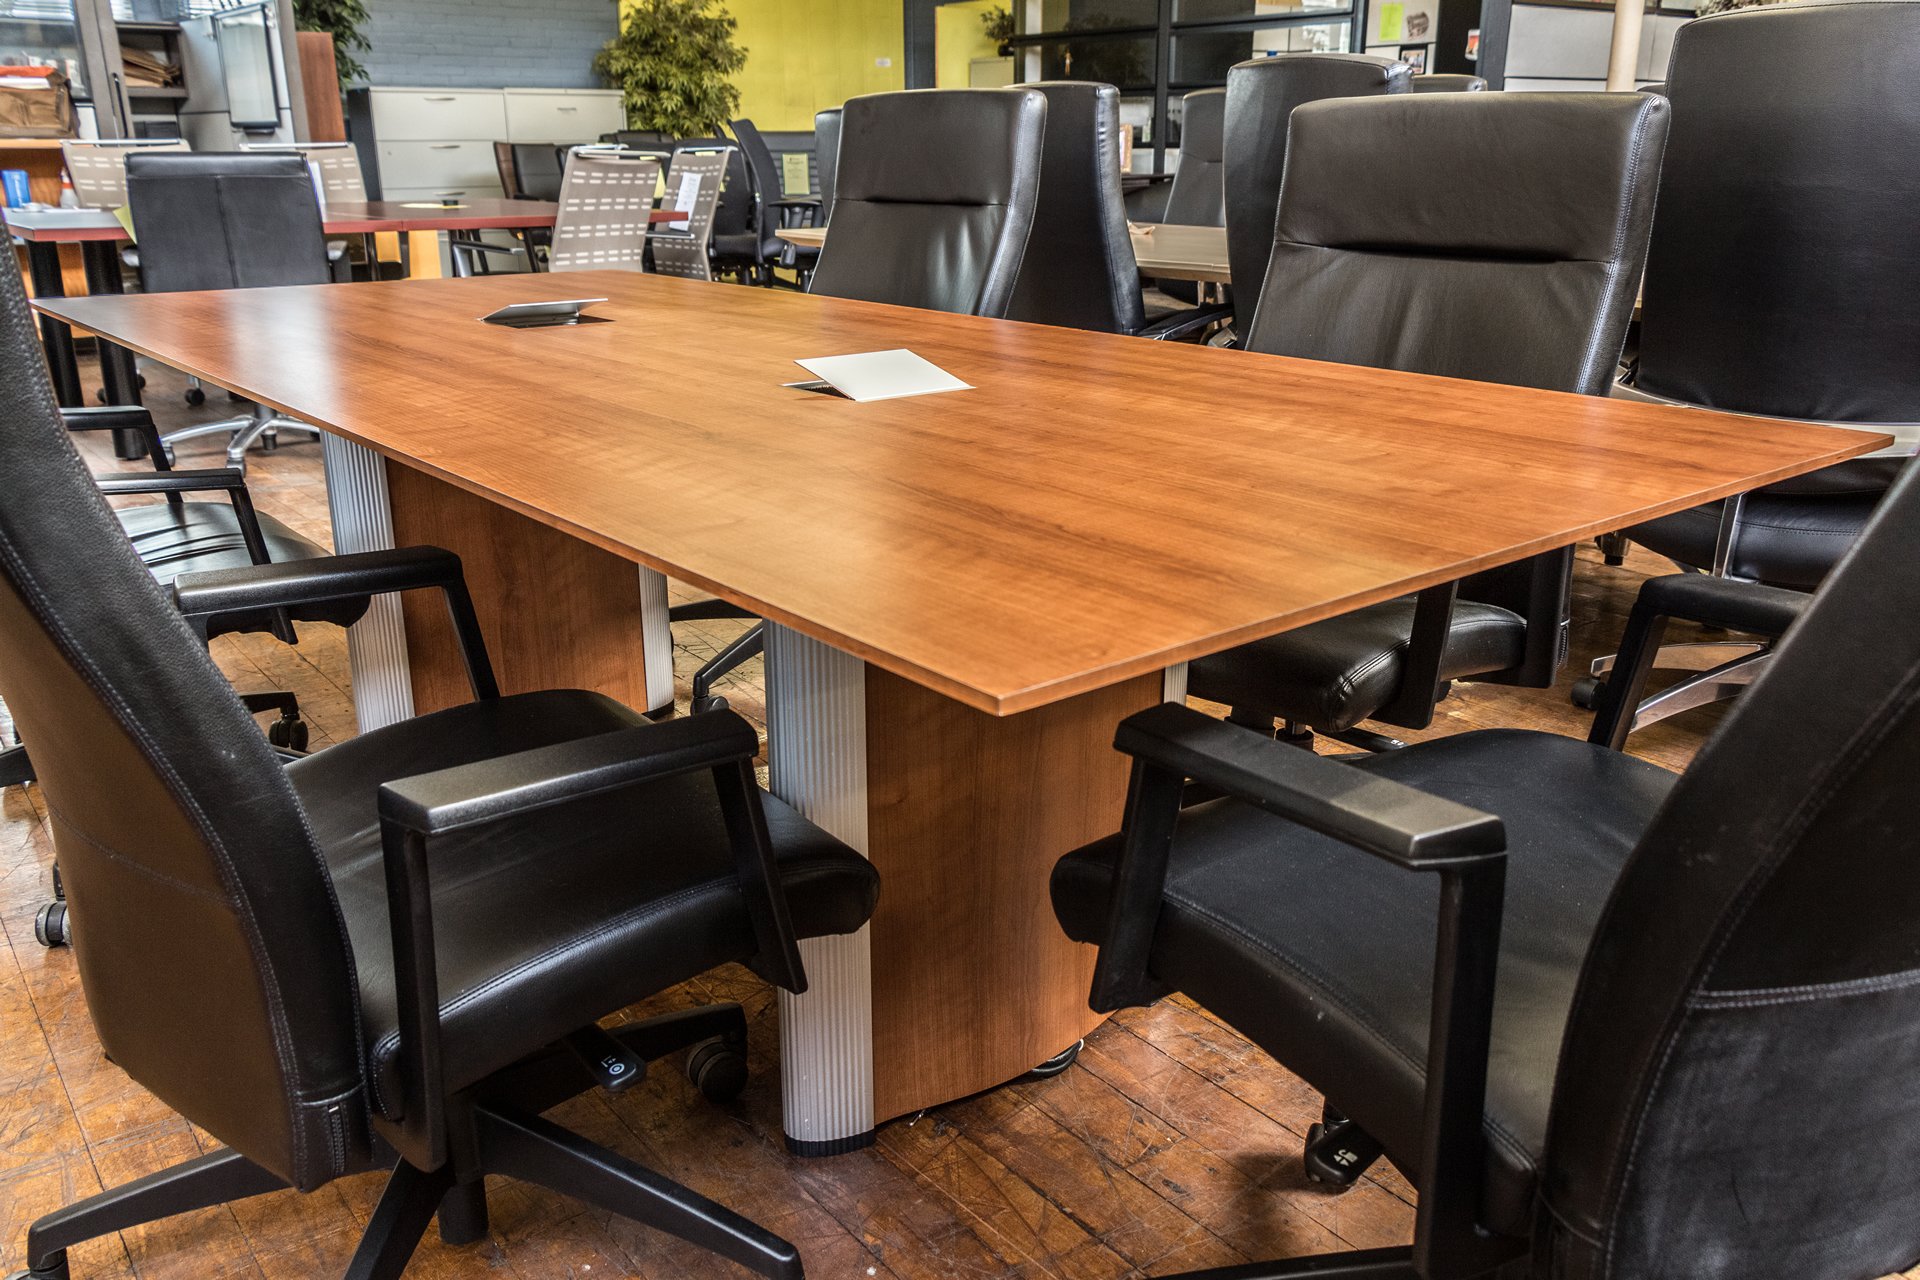 peartreeofficefurniture_peartreeofficefurniture_peartreeofficefurniture_nienkamper-vox-8-x-3-5-cherry-laminate-tapered-edge-conference-table-8.jpg